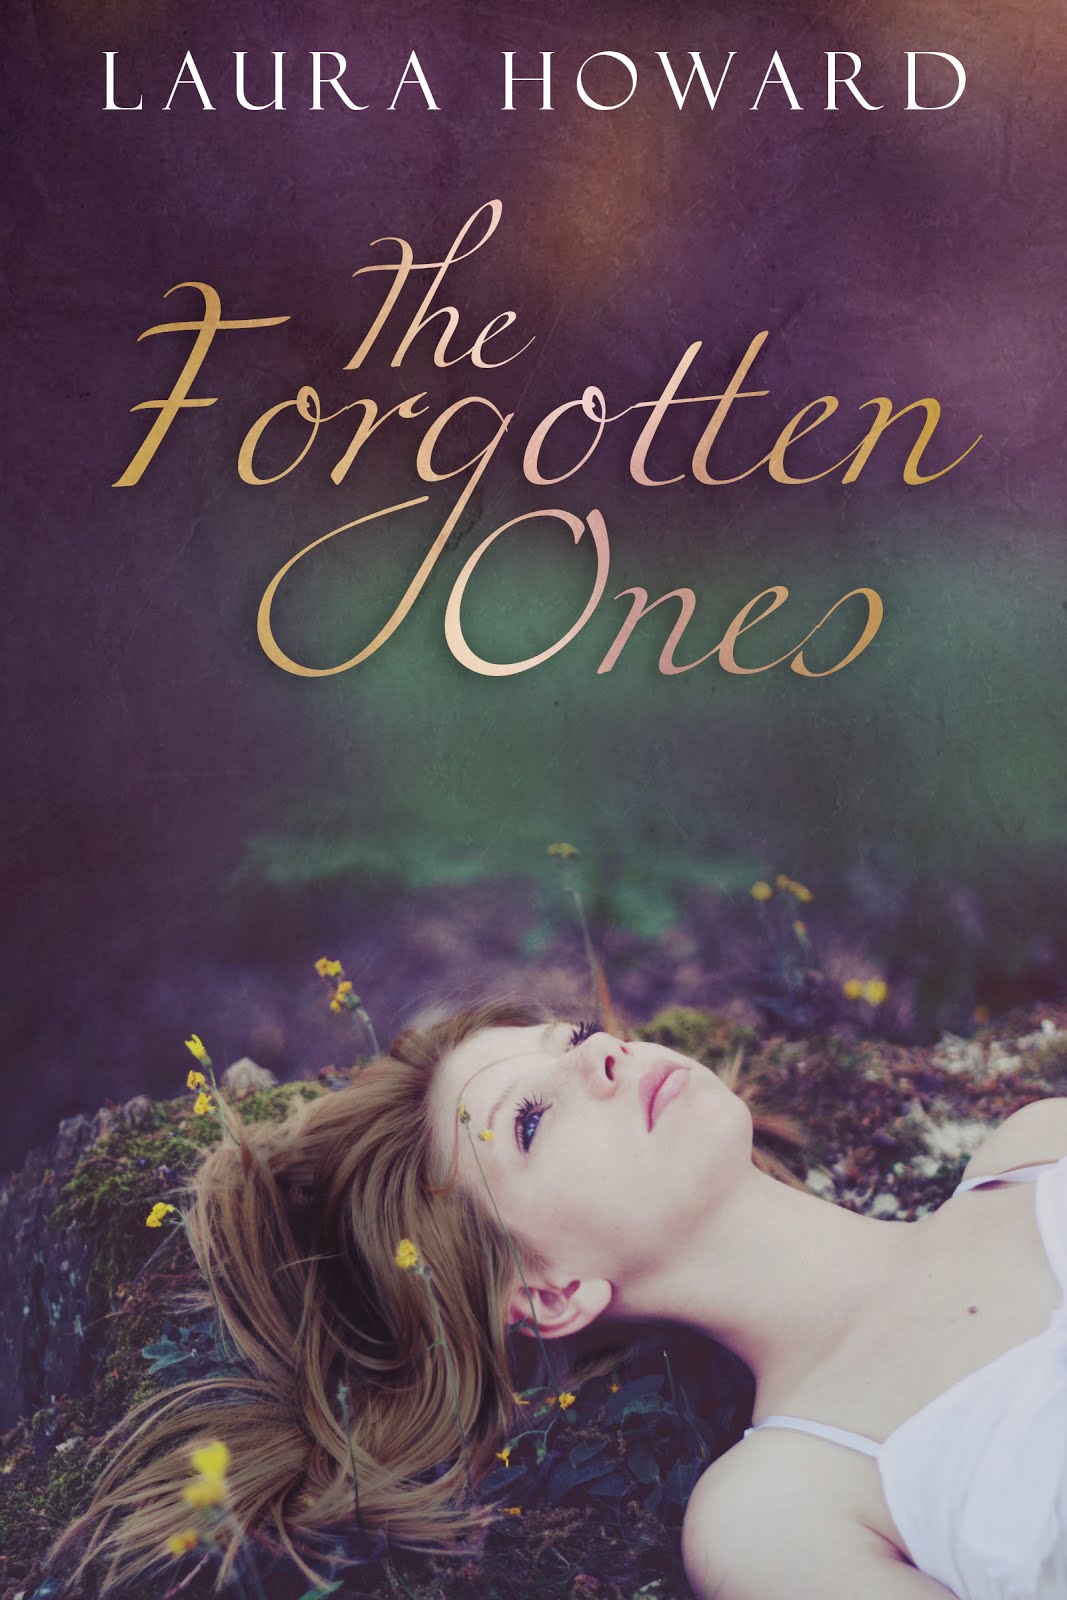 The Forgotten Ones by Laura Howard